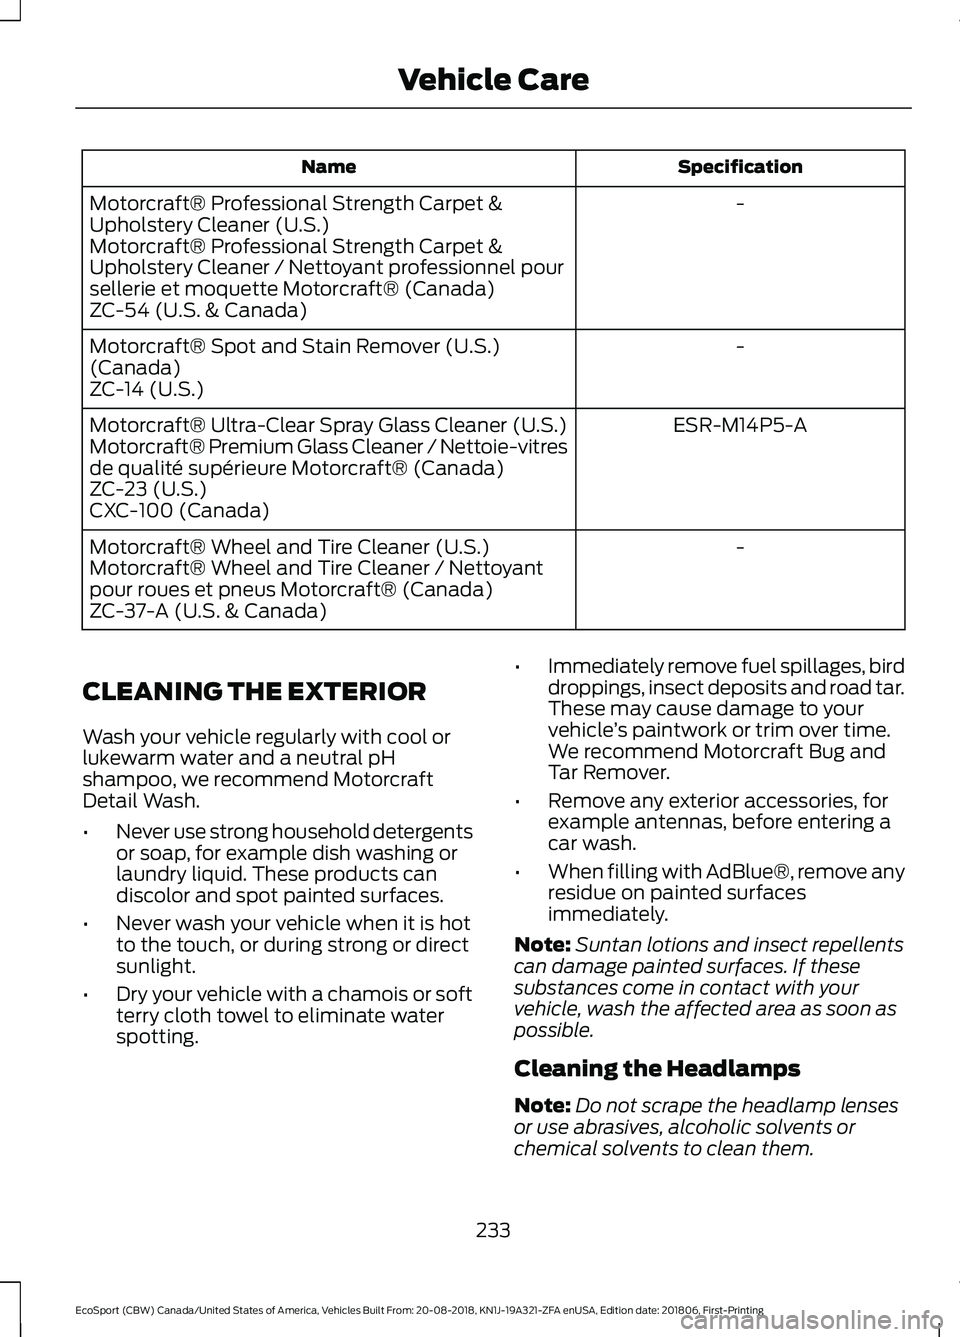 FORD ECOSPORT 2019  Owners Manual SpecificationName
-Motorcraft® Professional Strength Carpet &Upholstery Cleaner (U.S.)Motorcraft® Professional Strength Carpet &Upholstery Cleaner / Nettoyant professionnel poursellerie et moquette 